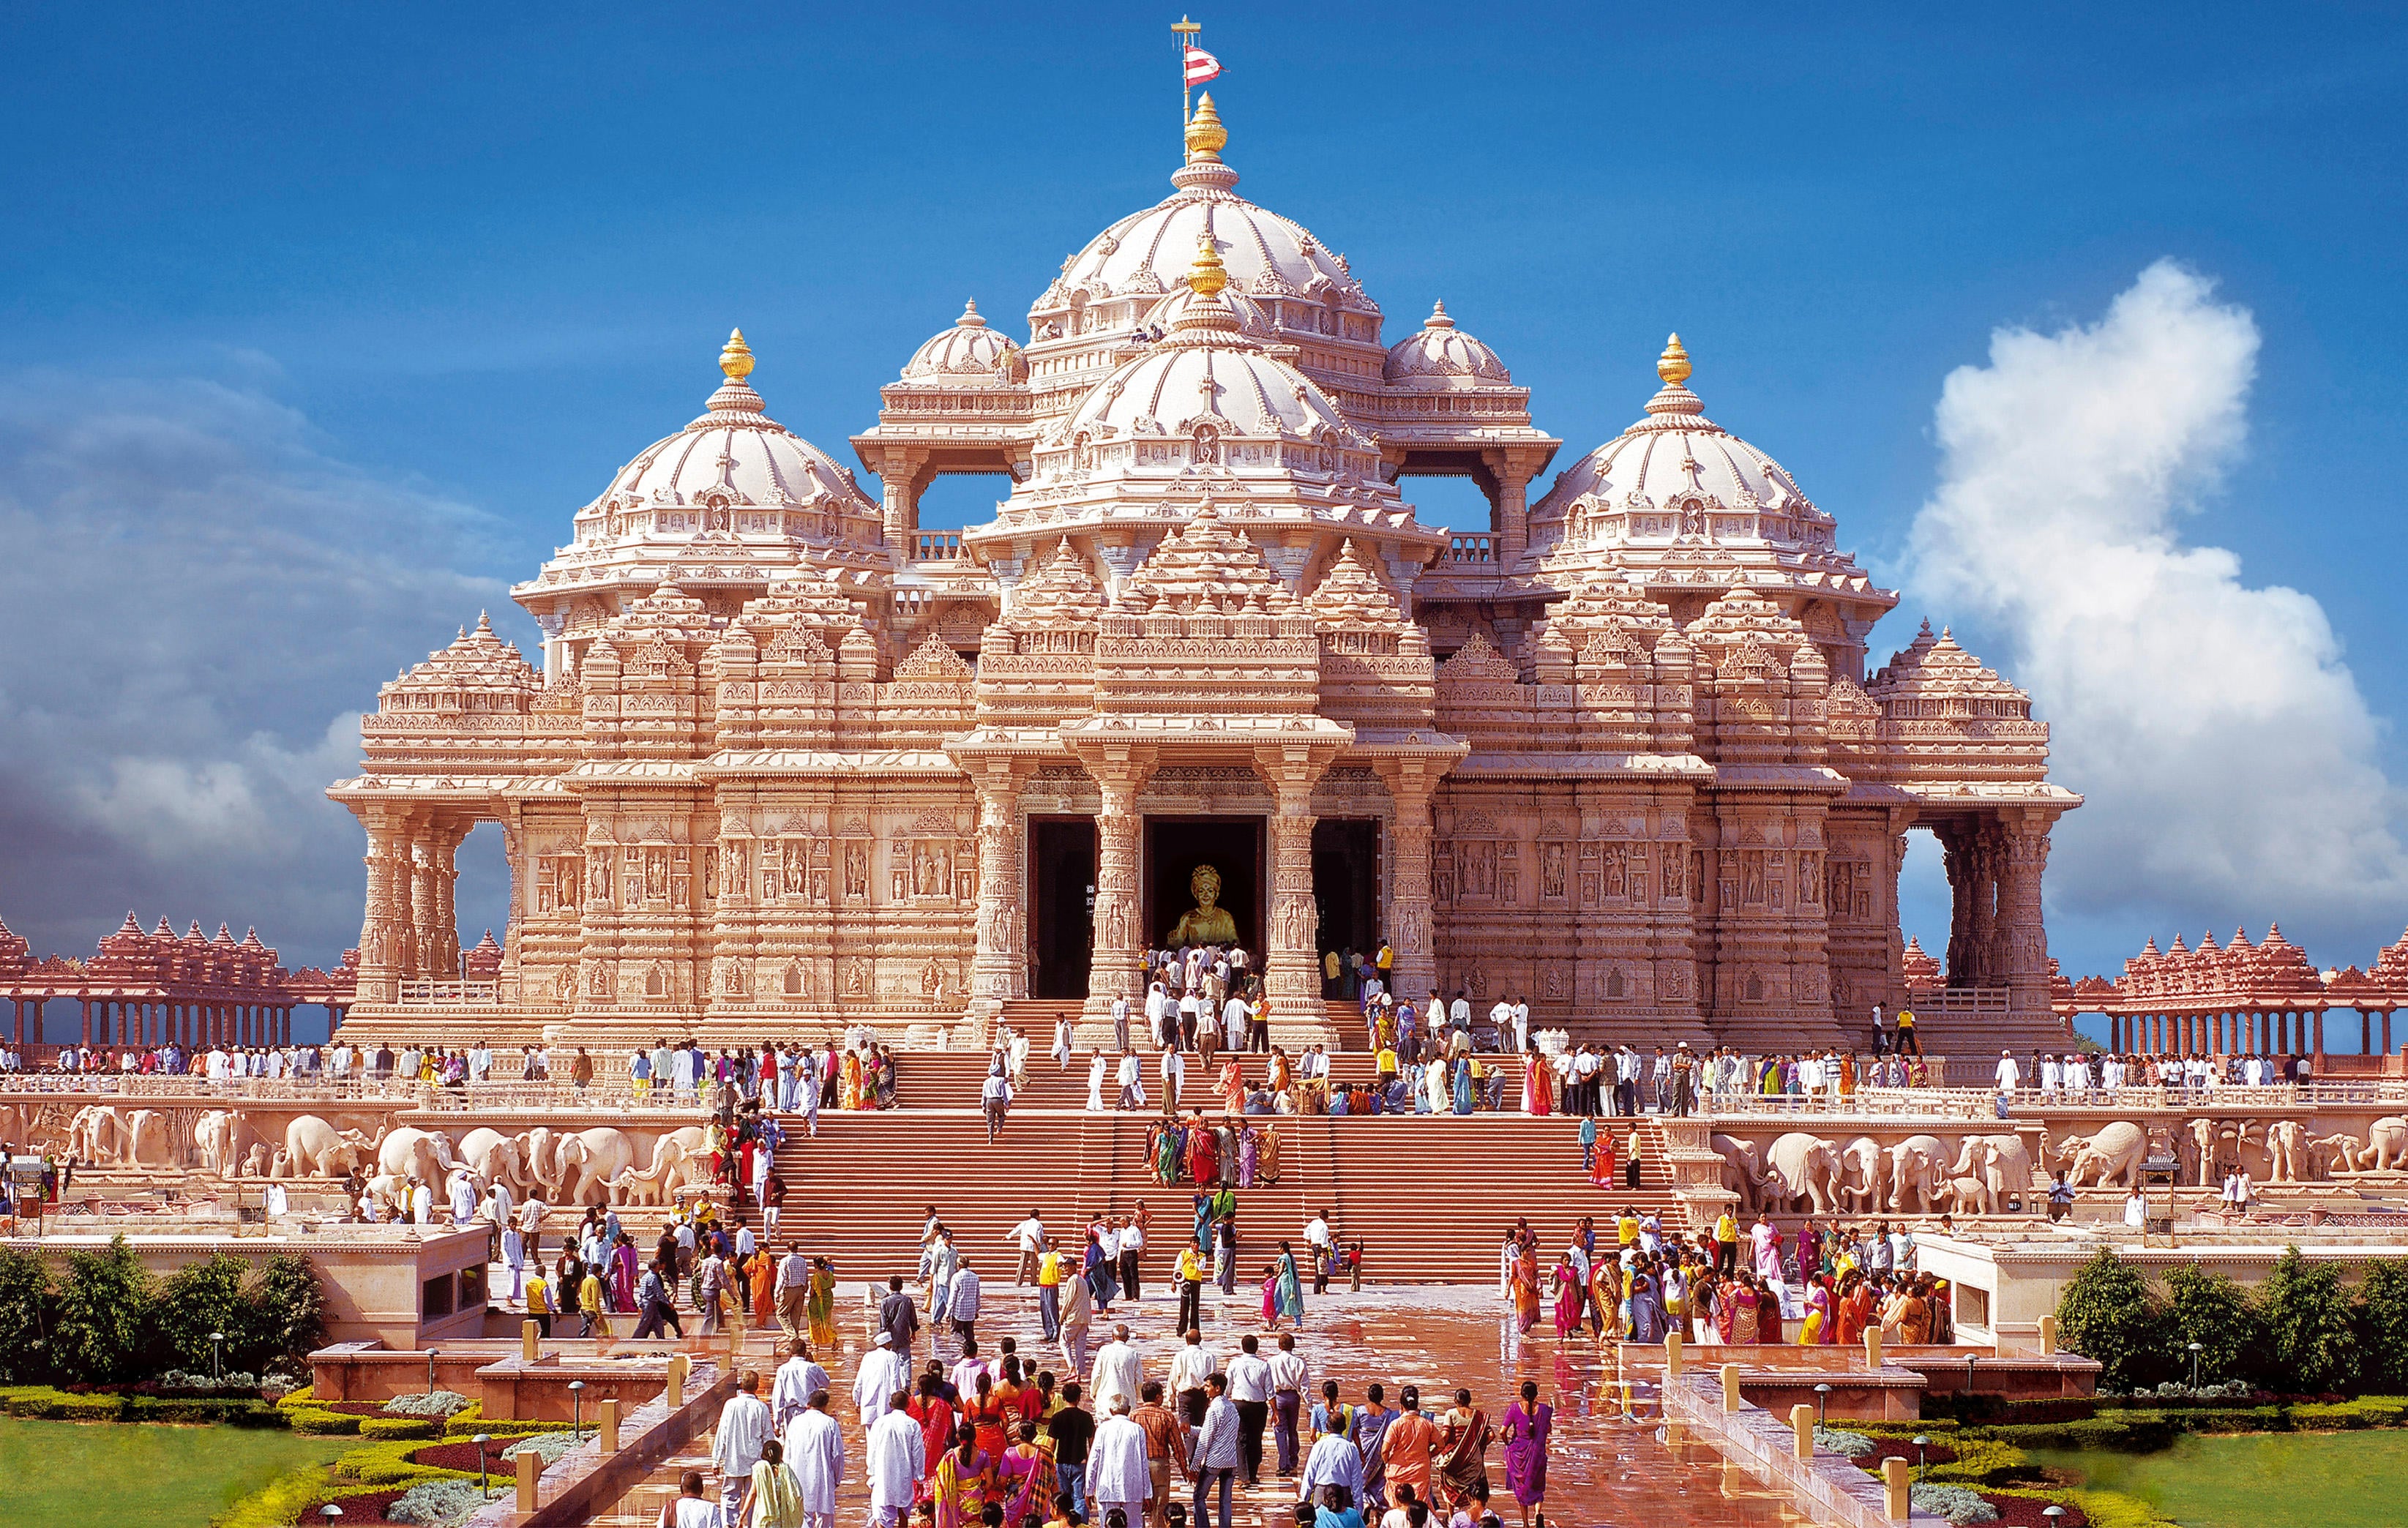 Akshardham Temple One of the Top Attractions in New Delhi, India